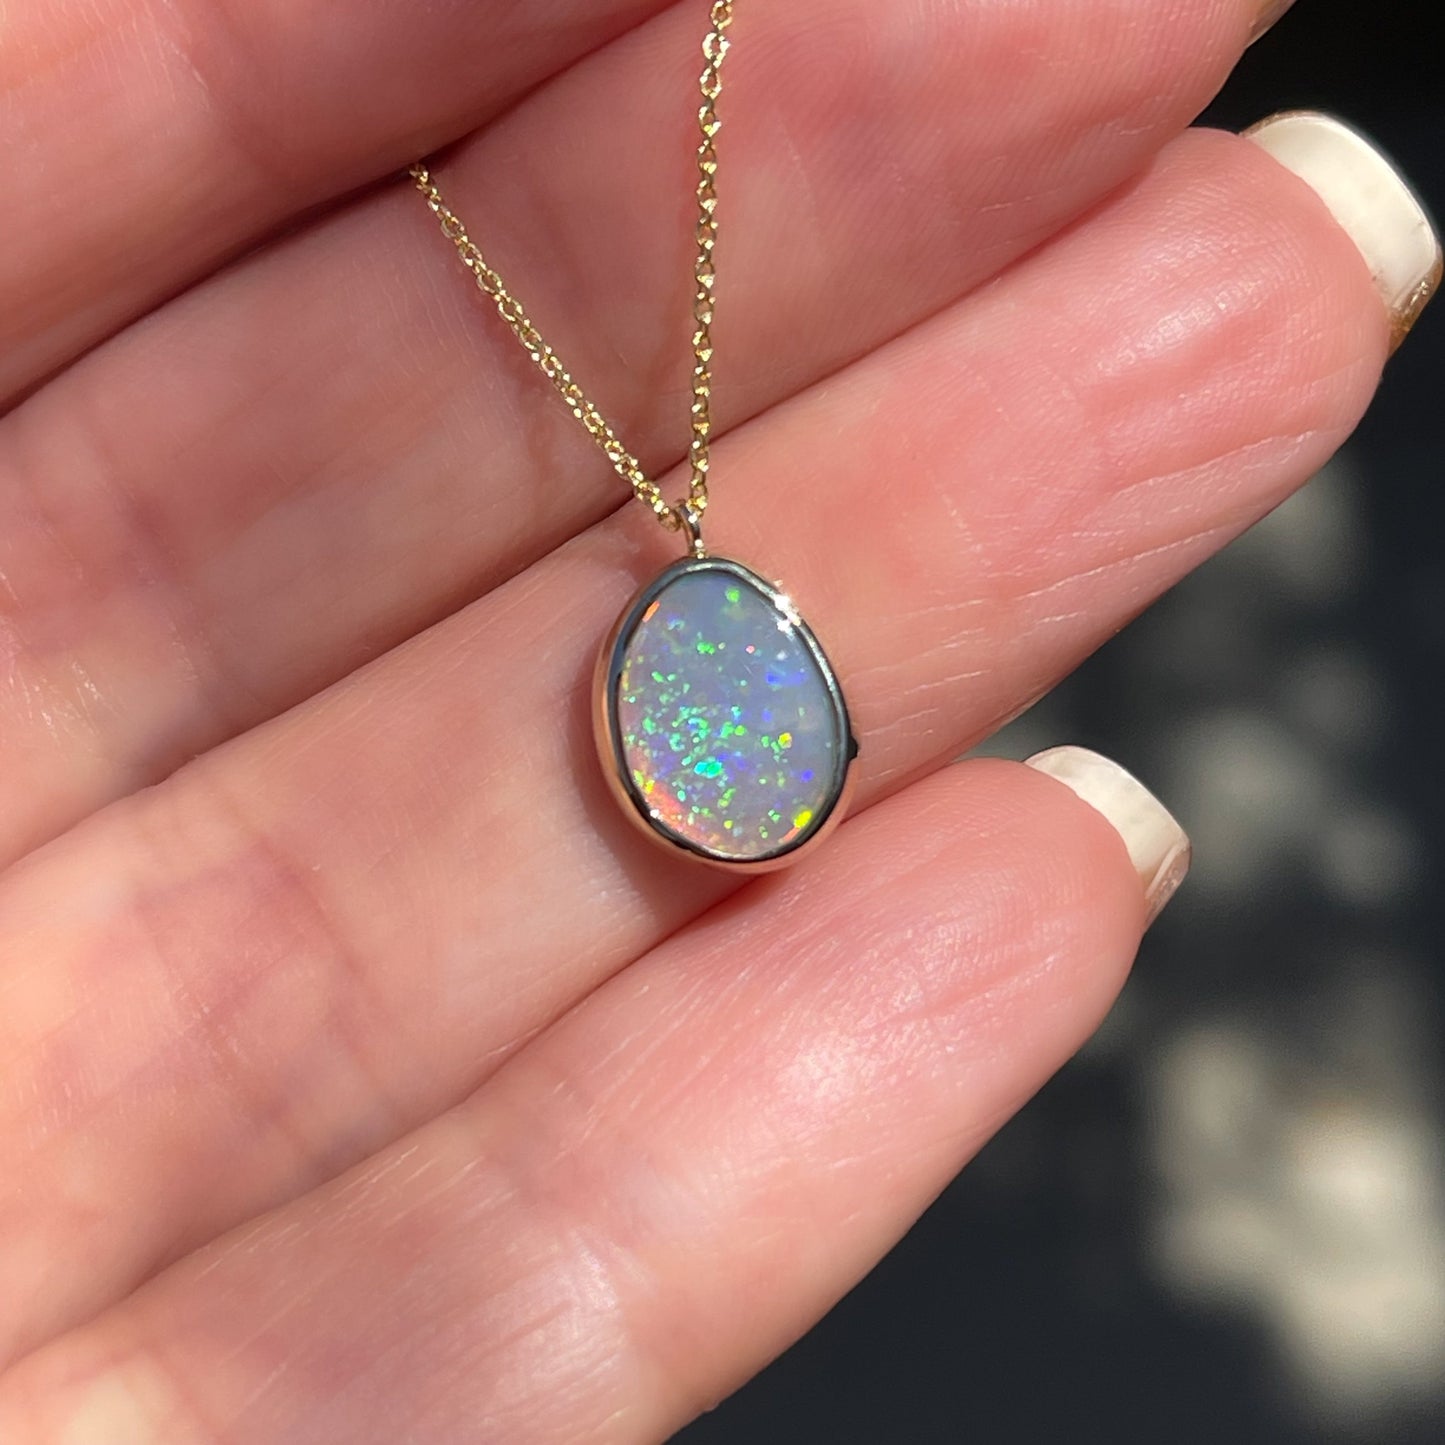 An Australian Opal Necklace by NIXIN Jewelry. A gold opal necklace with a black opal stone.